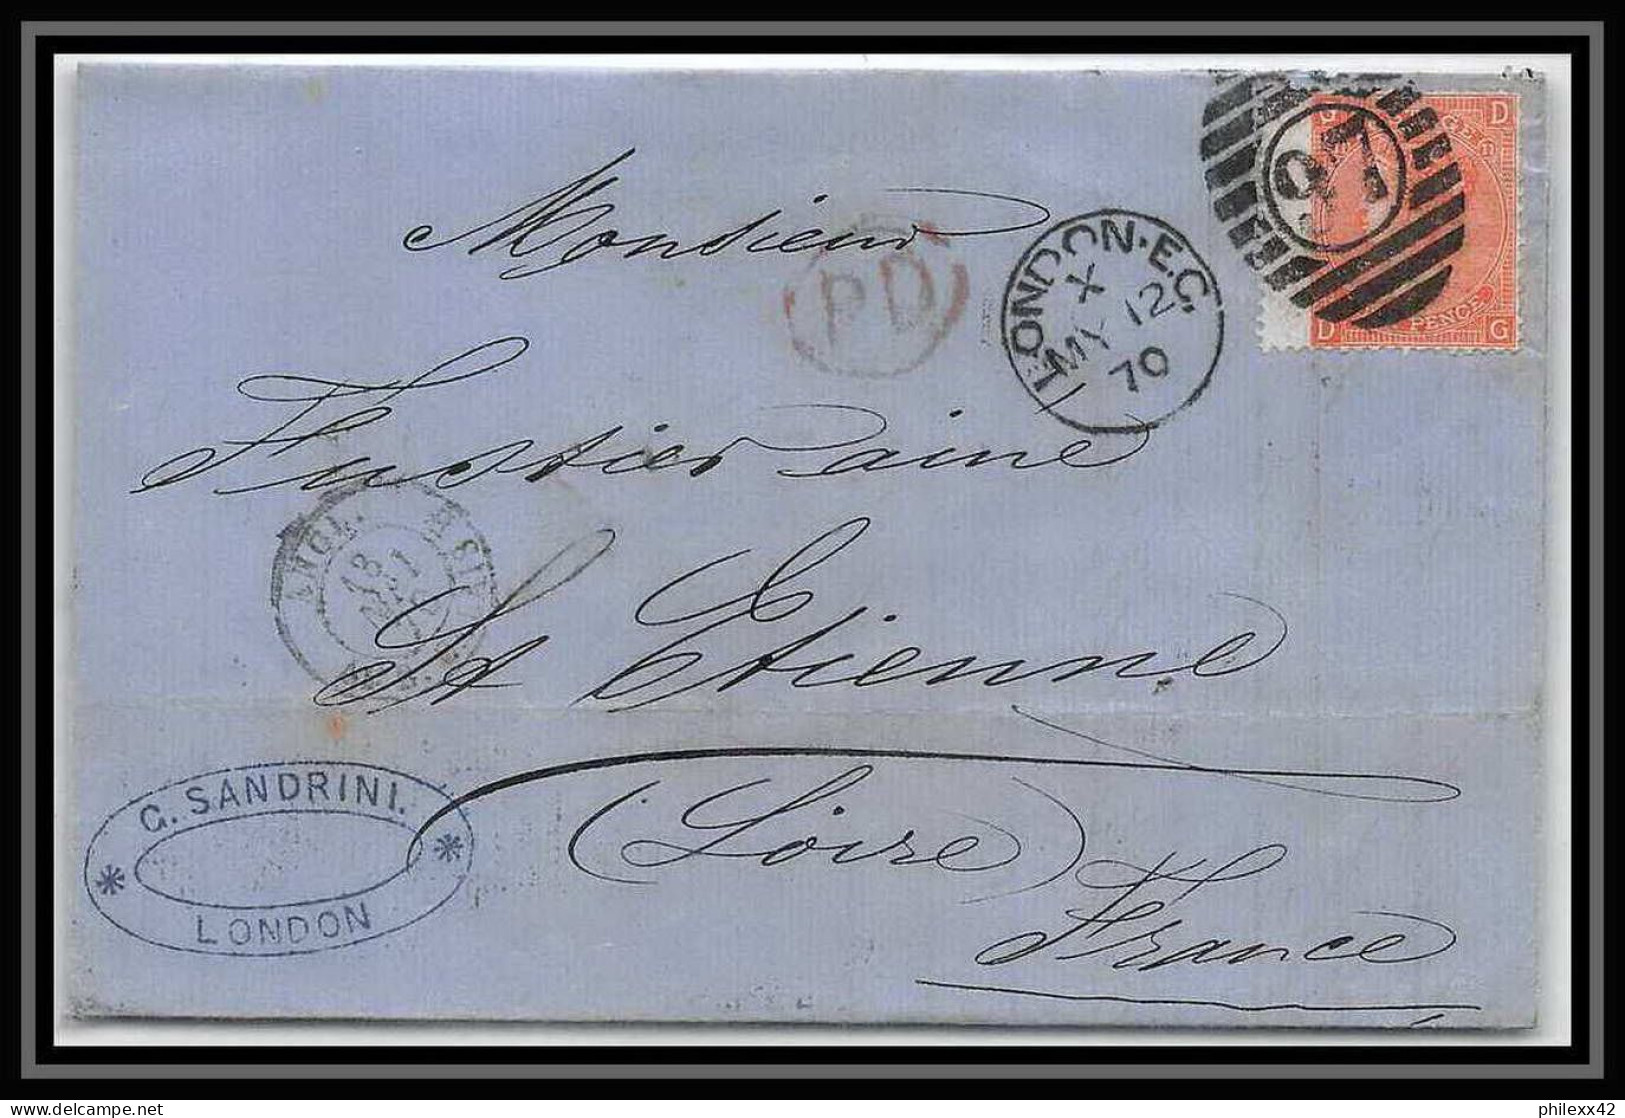 35812 N°32 Victoria 4p Red London St Etienne France 1870 Cachet 97 Lettre Cover Grande Bretagne England - Covers & Documents